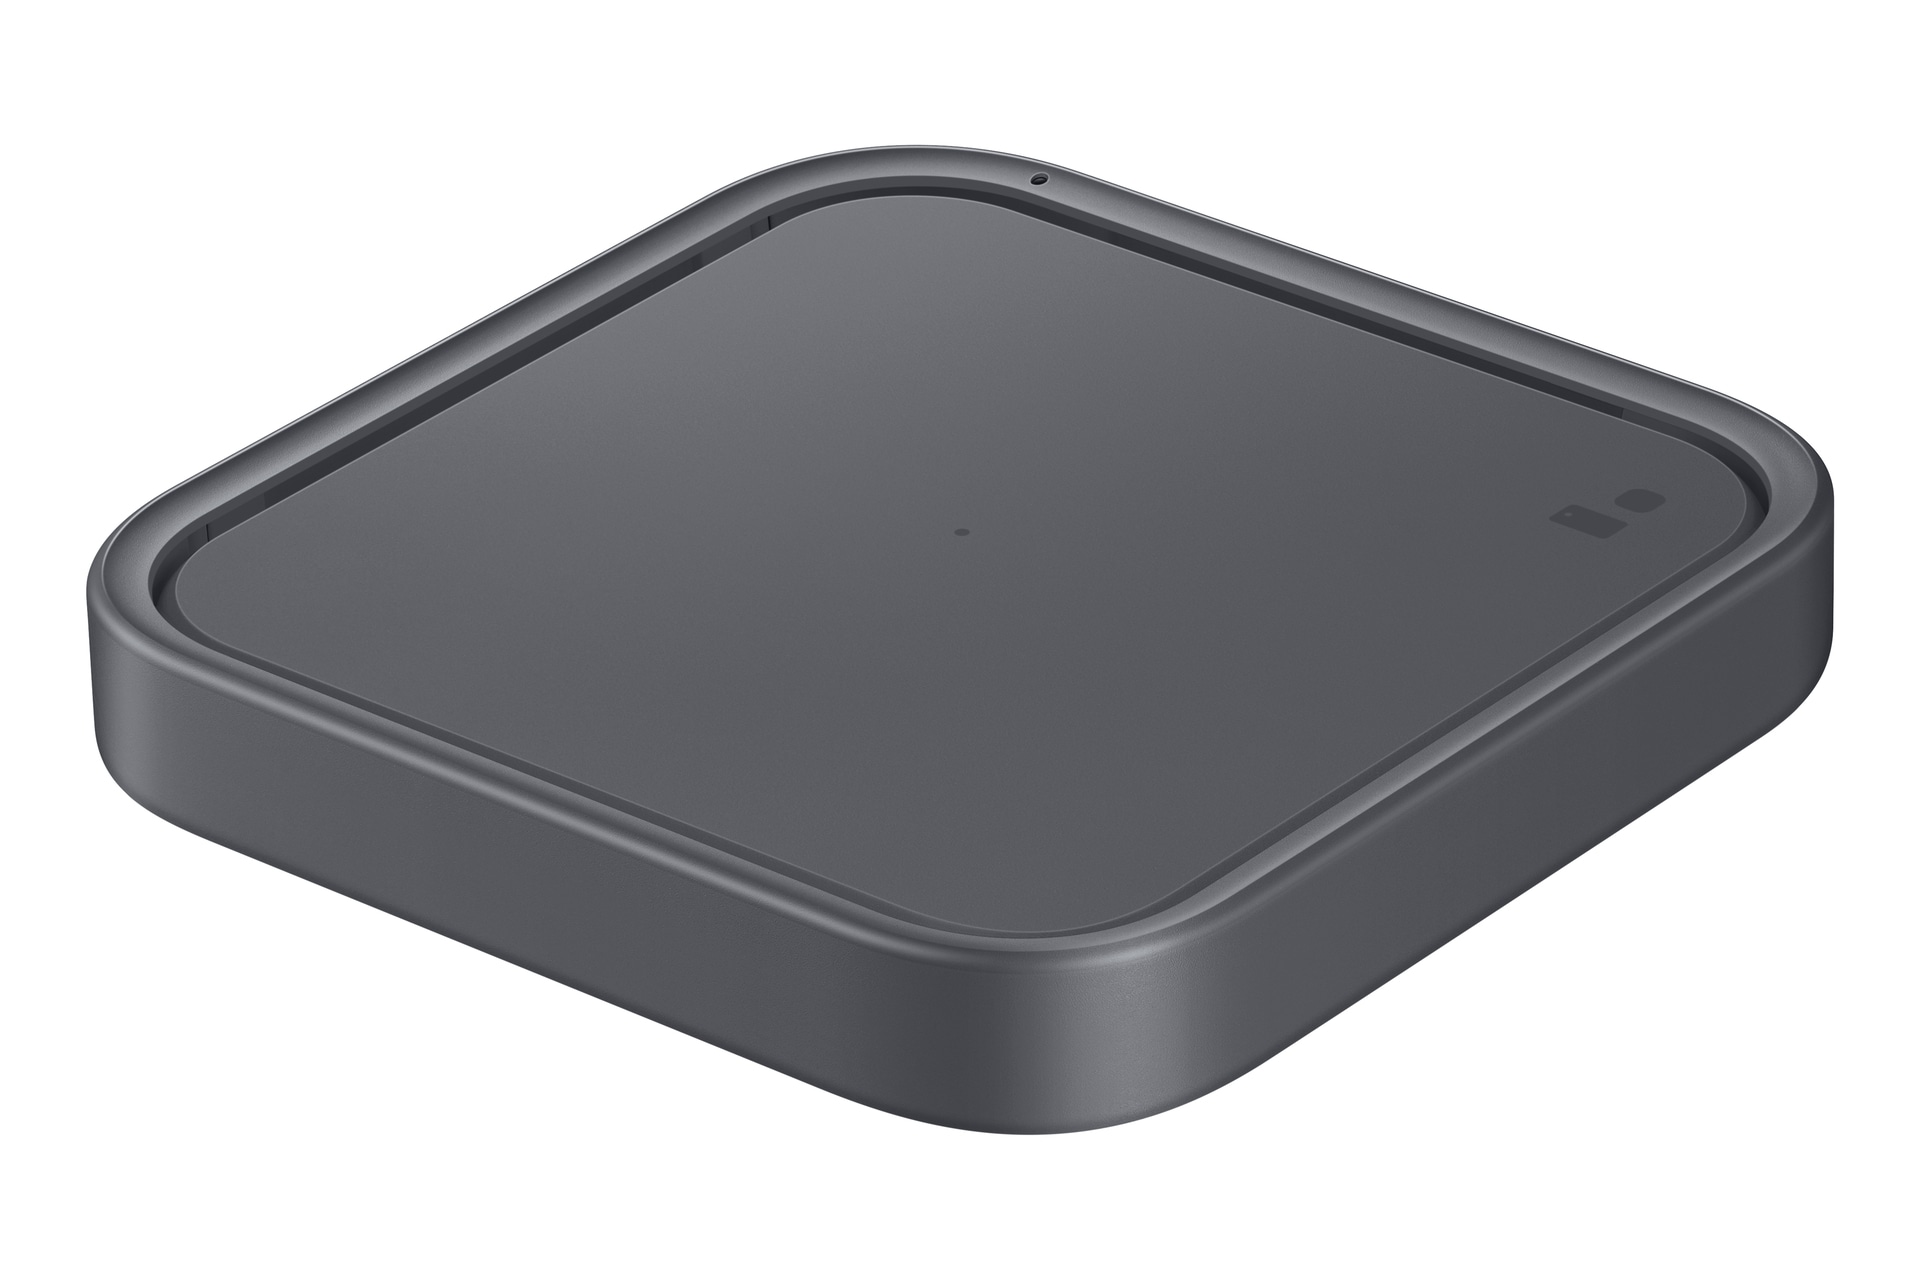 Samsung Induktions-Ladegerät »Wireless Charger Pad EP-P2400«